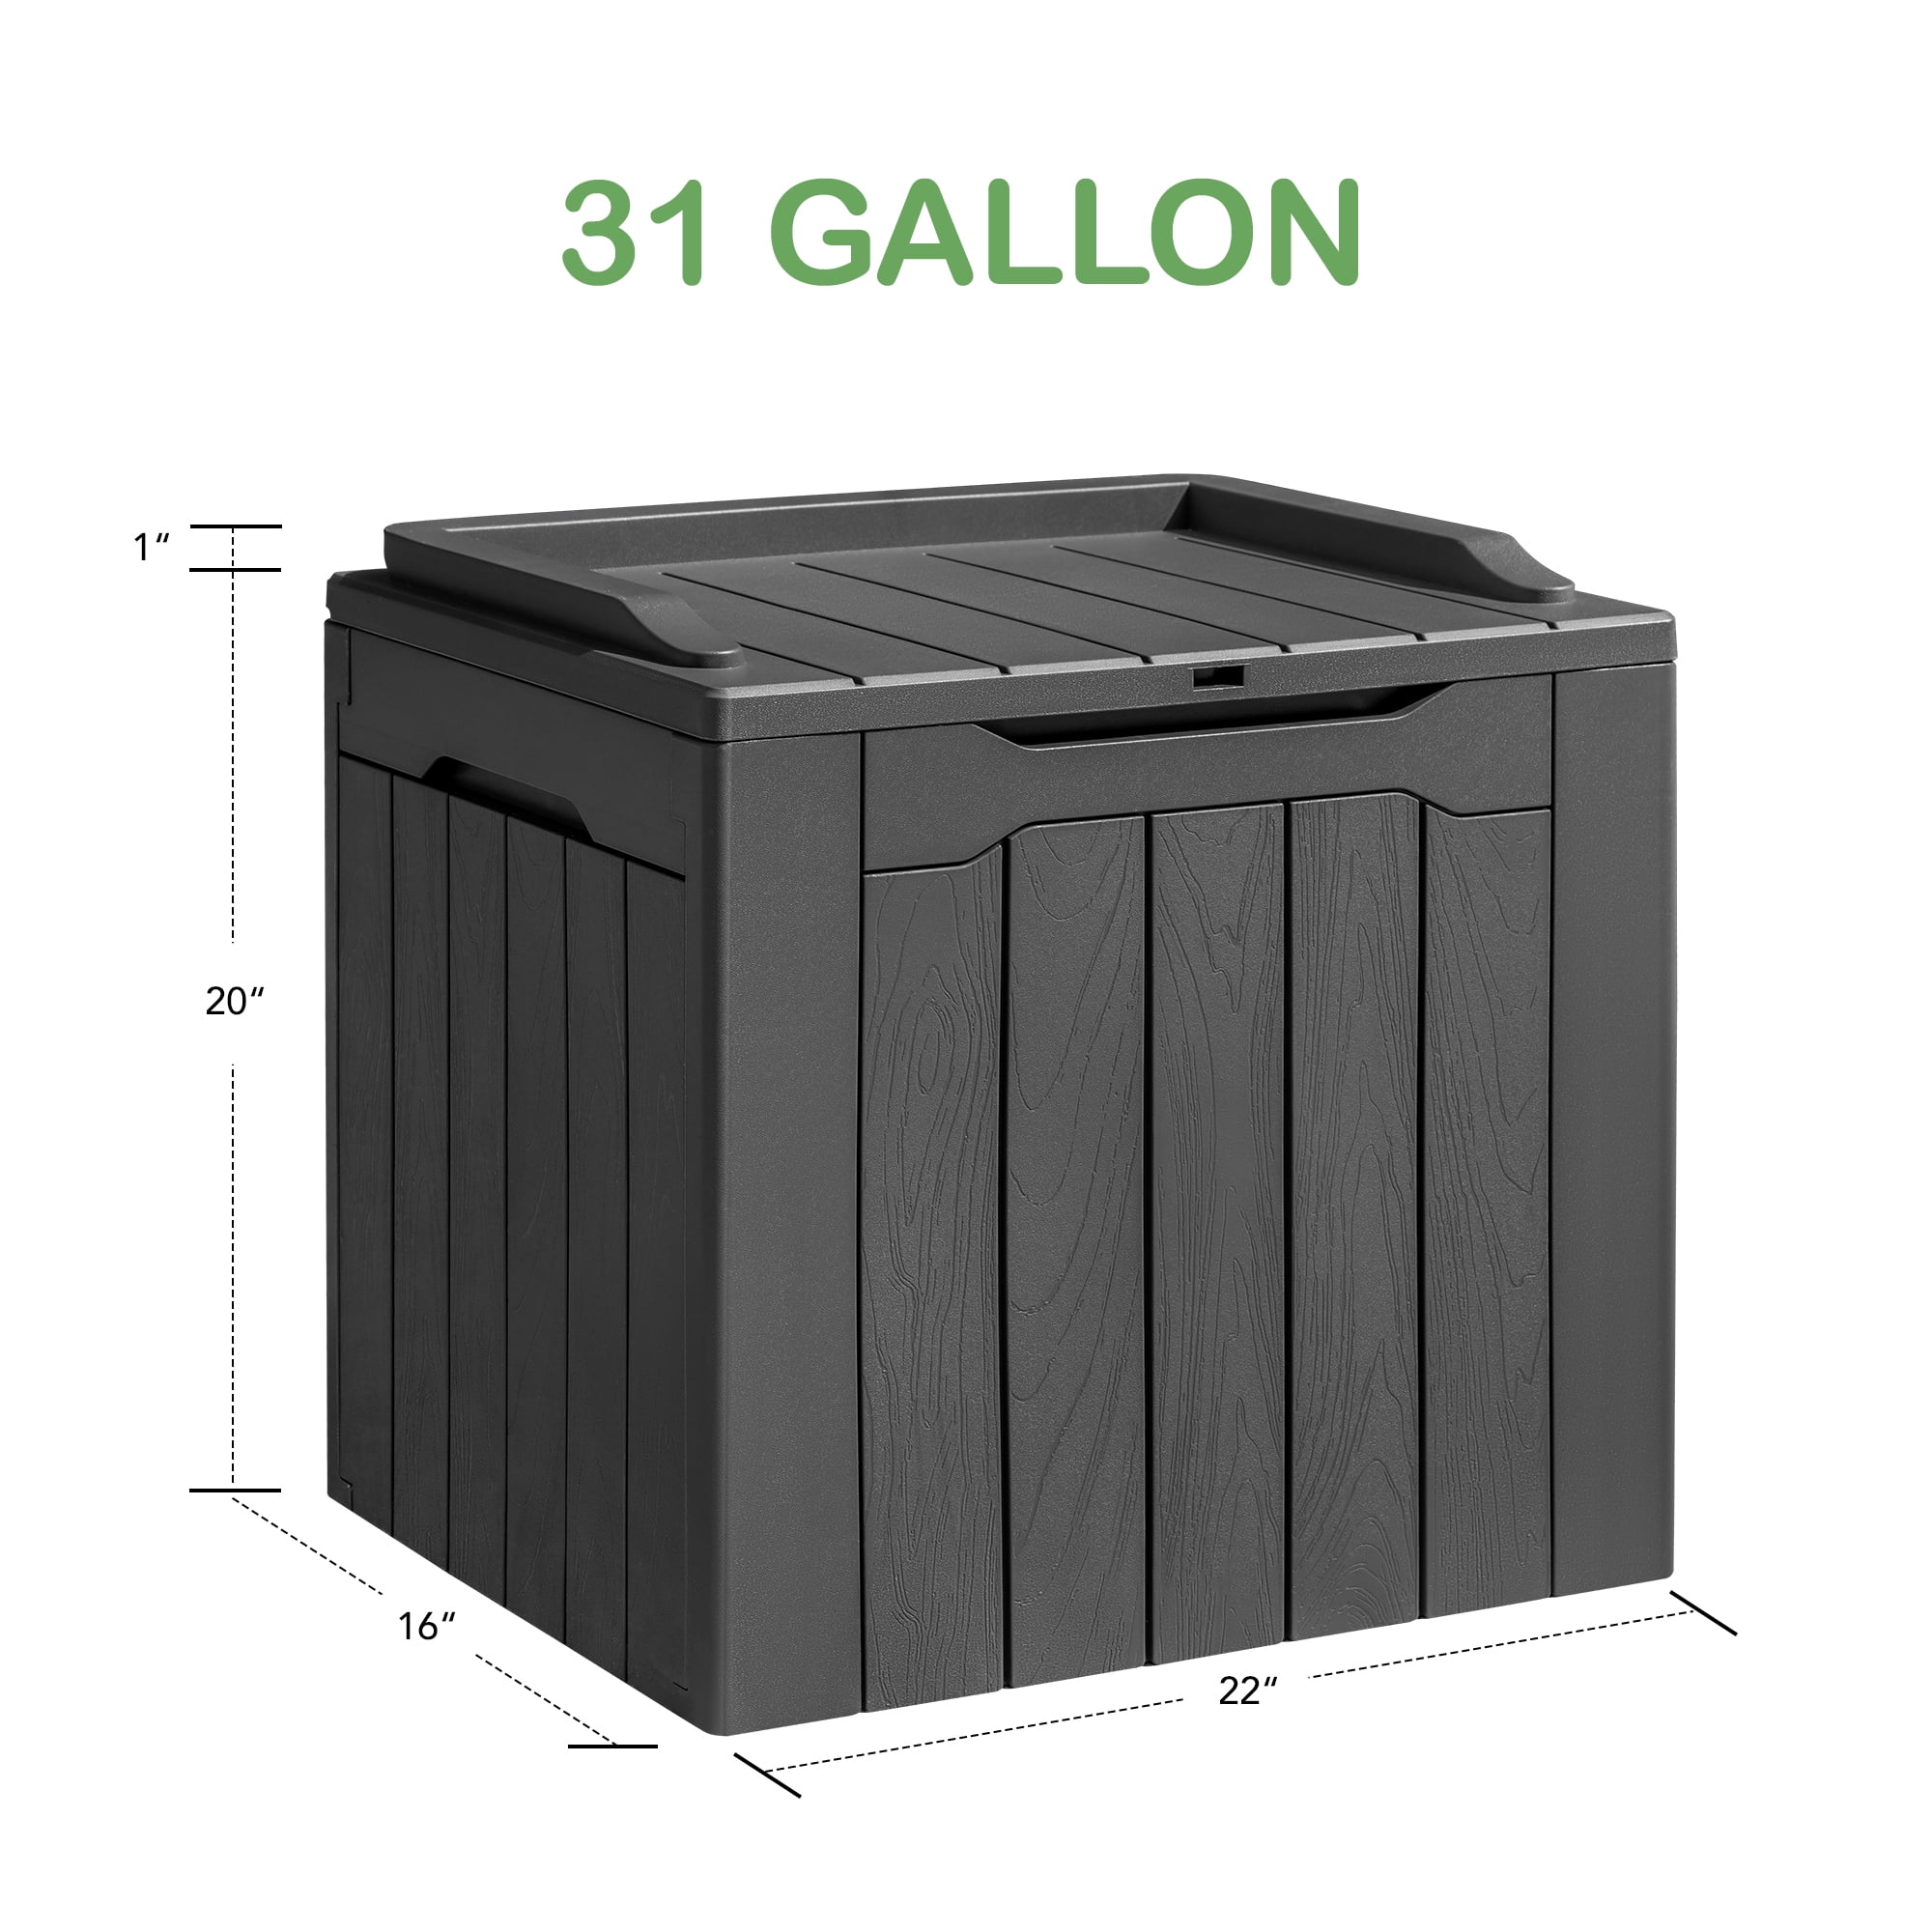 Homall 31 Gallon Outdoor Deck Box In Resin with Seat, Black